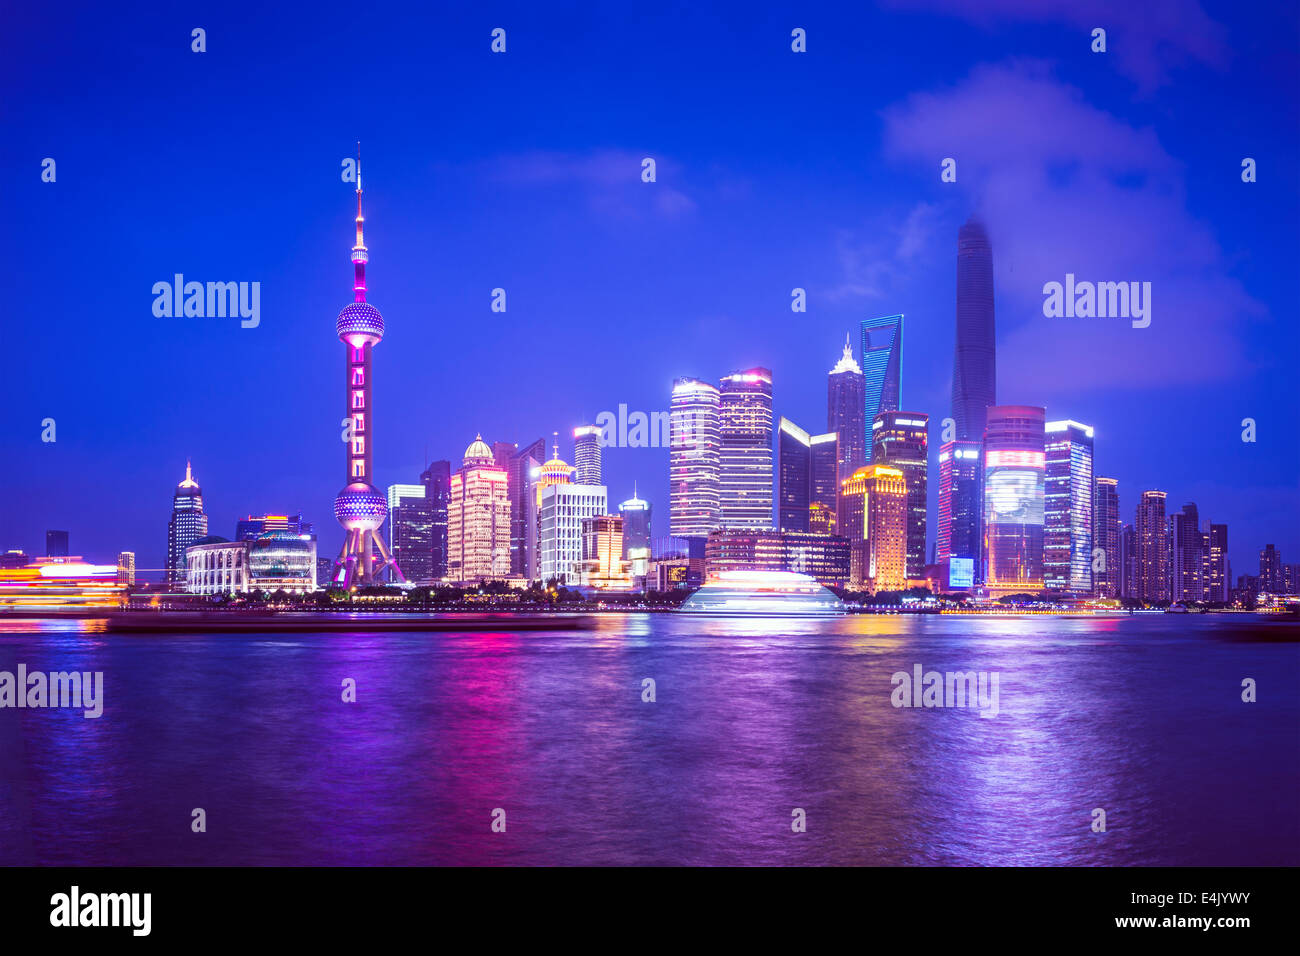 Shanghai, China view of the Pudong financial district from across the Huangpu River at night. Stock Photo